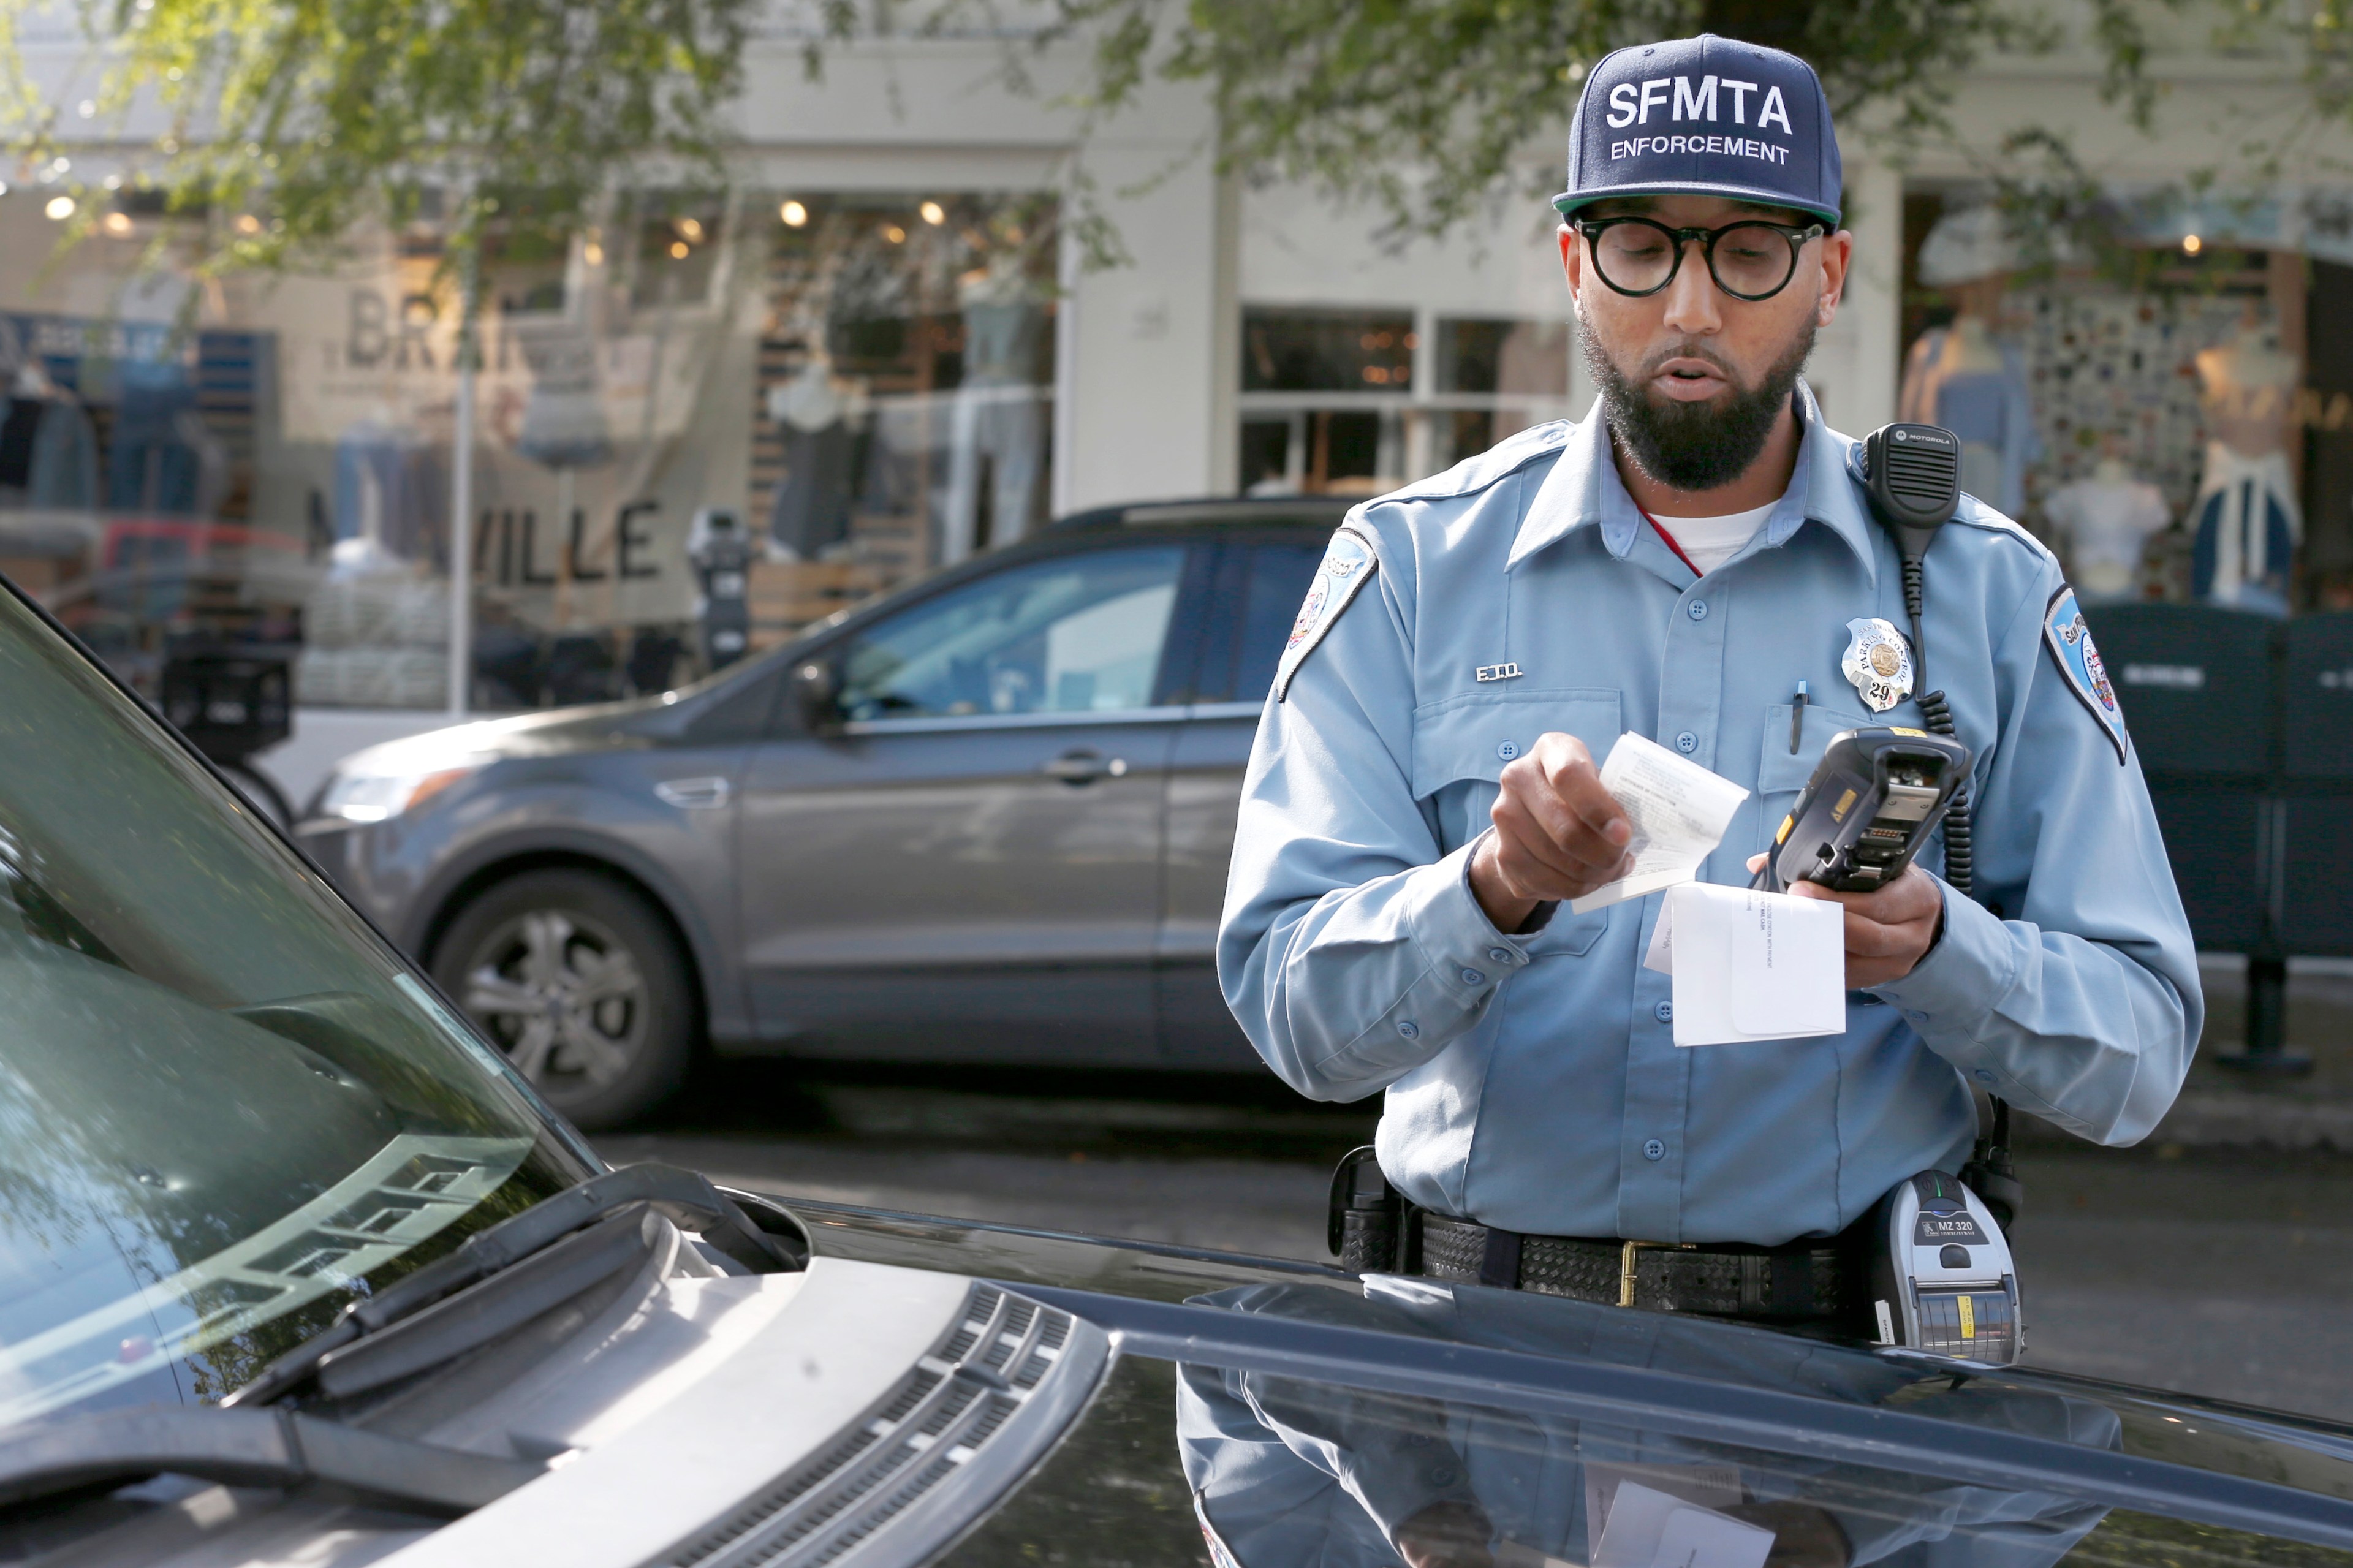 A man holding a device prints out a ticket in front of a vehicle.